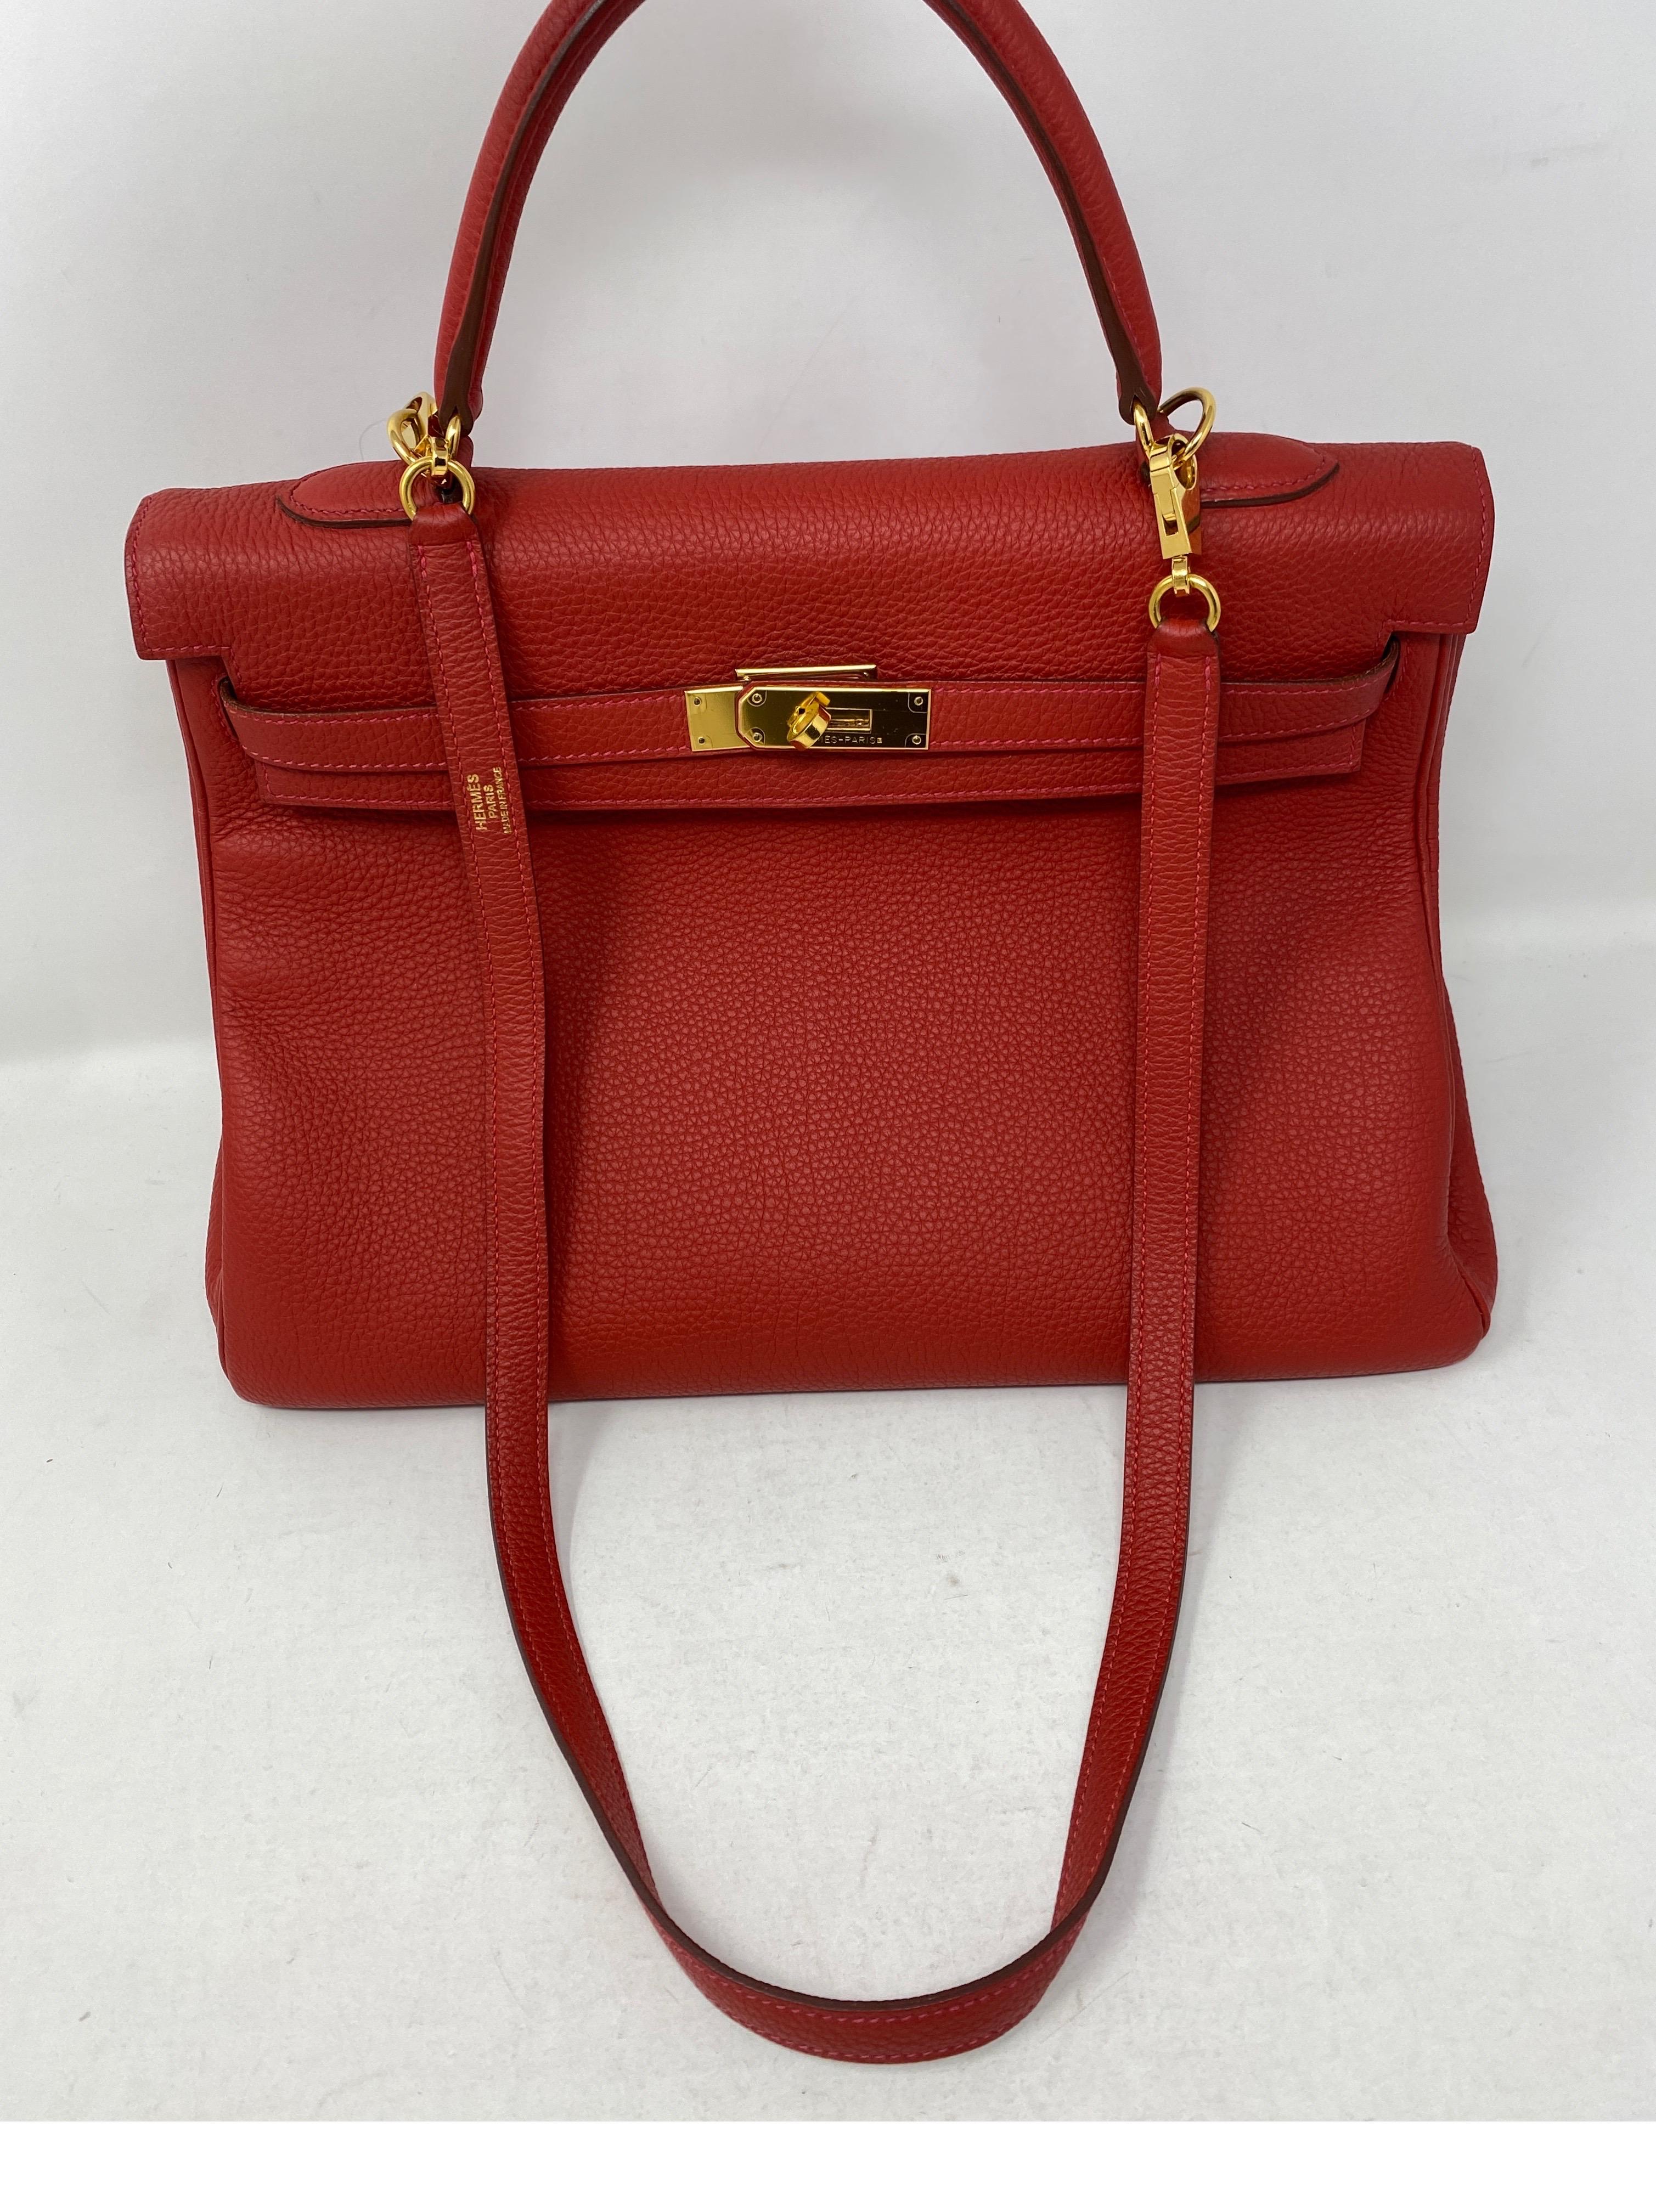 Hermes Vermillion Red Kelly 35 Bag. Beautiful red with orange undertones color with gold hardware. Togo leather. Good condition. Comes with original receipt. Guaranteed authentic. 